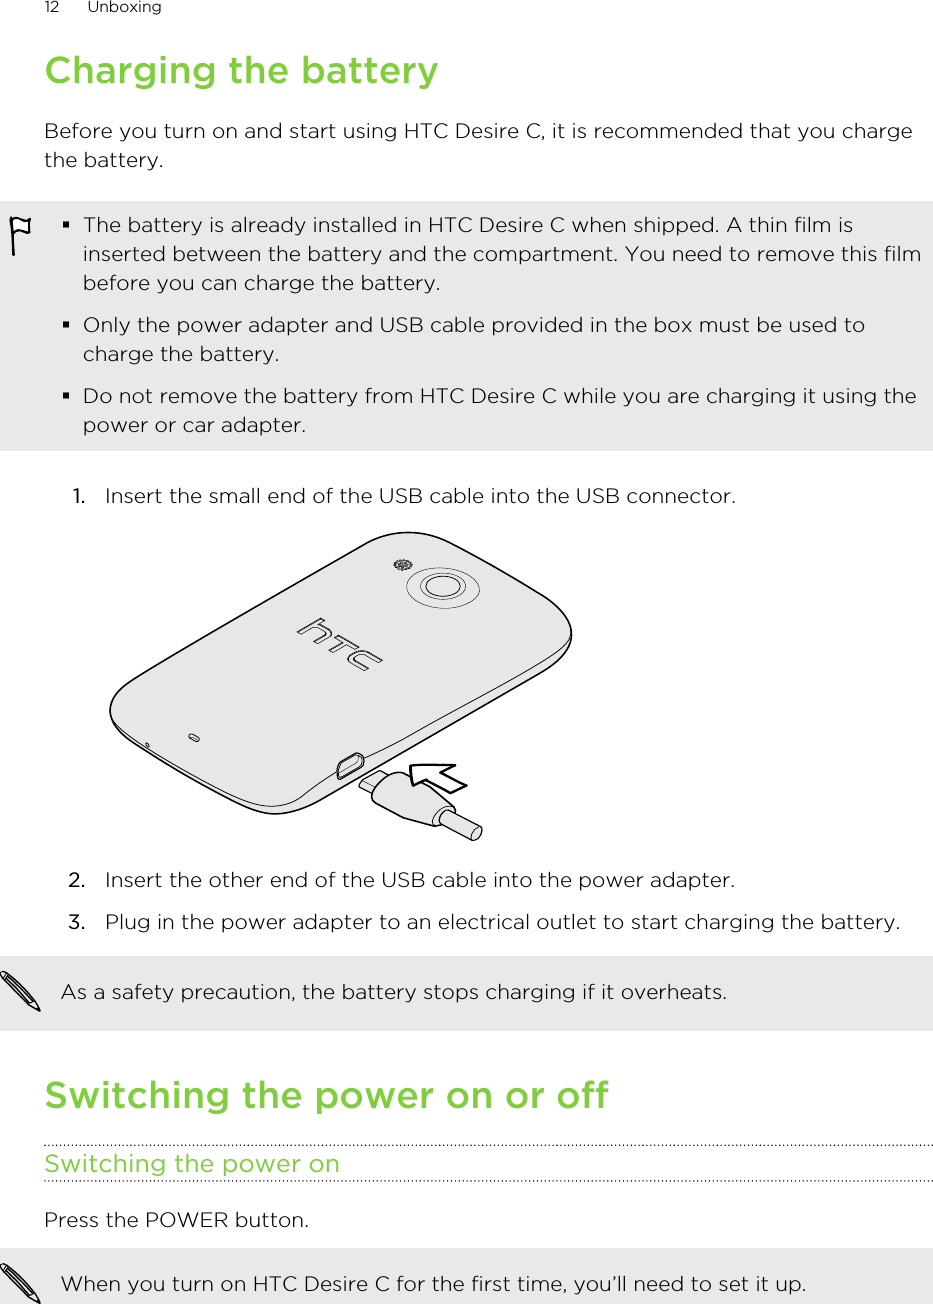 Charging the batteryBefore you turn on and start using HTC Desire C, it is recommended that you chargethe battery.§The battery is already installed in HTC Desire C when shipped. A thin film isinserted between the battery and the compartment. You need to remove this filmbefore you can charge the battery.§Only the power adapter and USB cable provided in the box must be used tocharge the battery.§Do not remove the battery from HTC Desire C while you are charging it using thepower or car adapter.1. Insert the small end of the USB cable into the USB connector. 2. Insert the other end of the USB cable into the power adapter.3. Plug in the power adapter to an electrical outlet to start charging the battery.As a safety precaution, the battery stops charging if it overheats.Switching the power on or offSwitching the power onPress the POWER button. When you turn on HTC Desire C for the first time, you’ll need to set it up.12 Unboxing